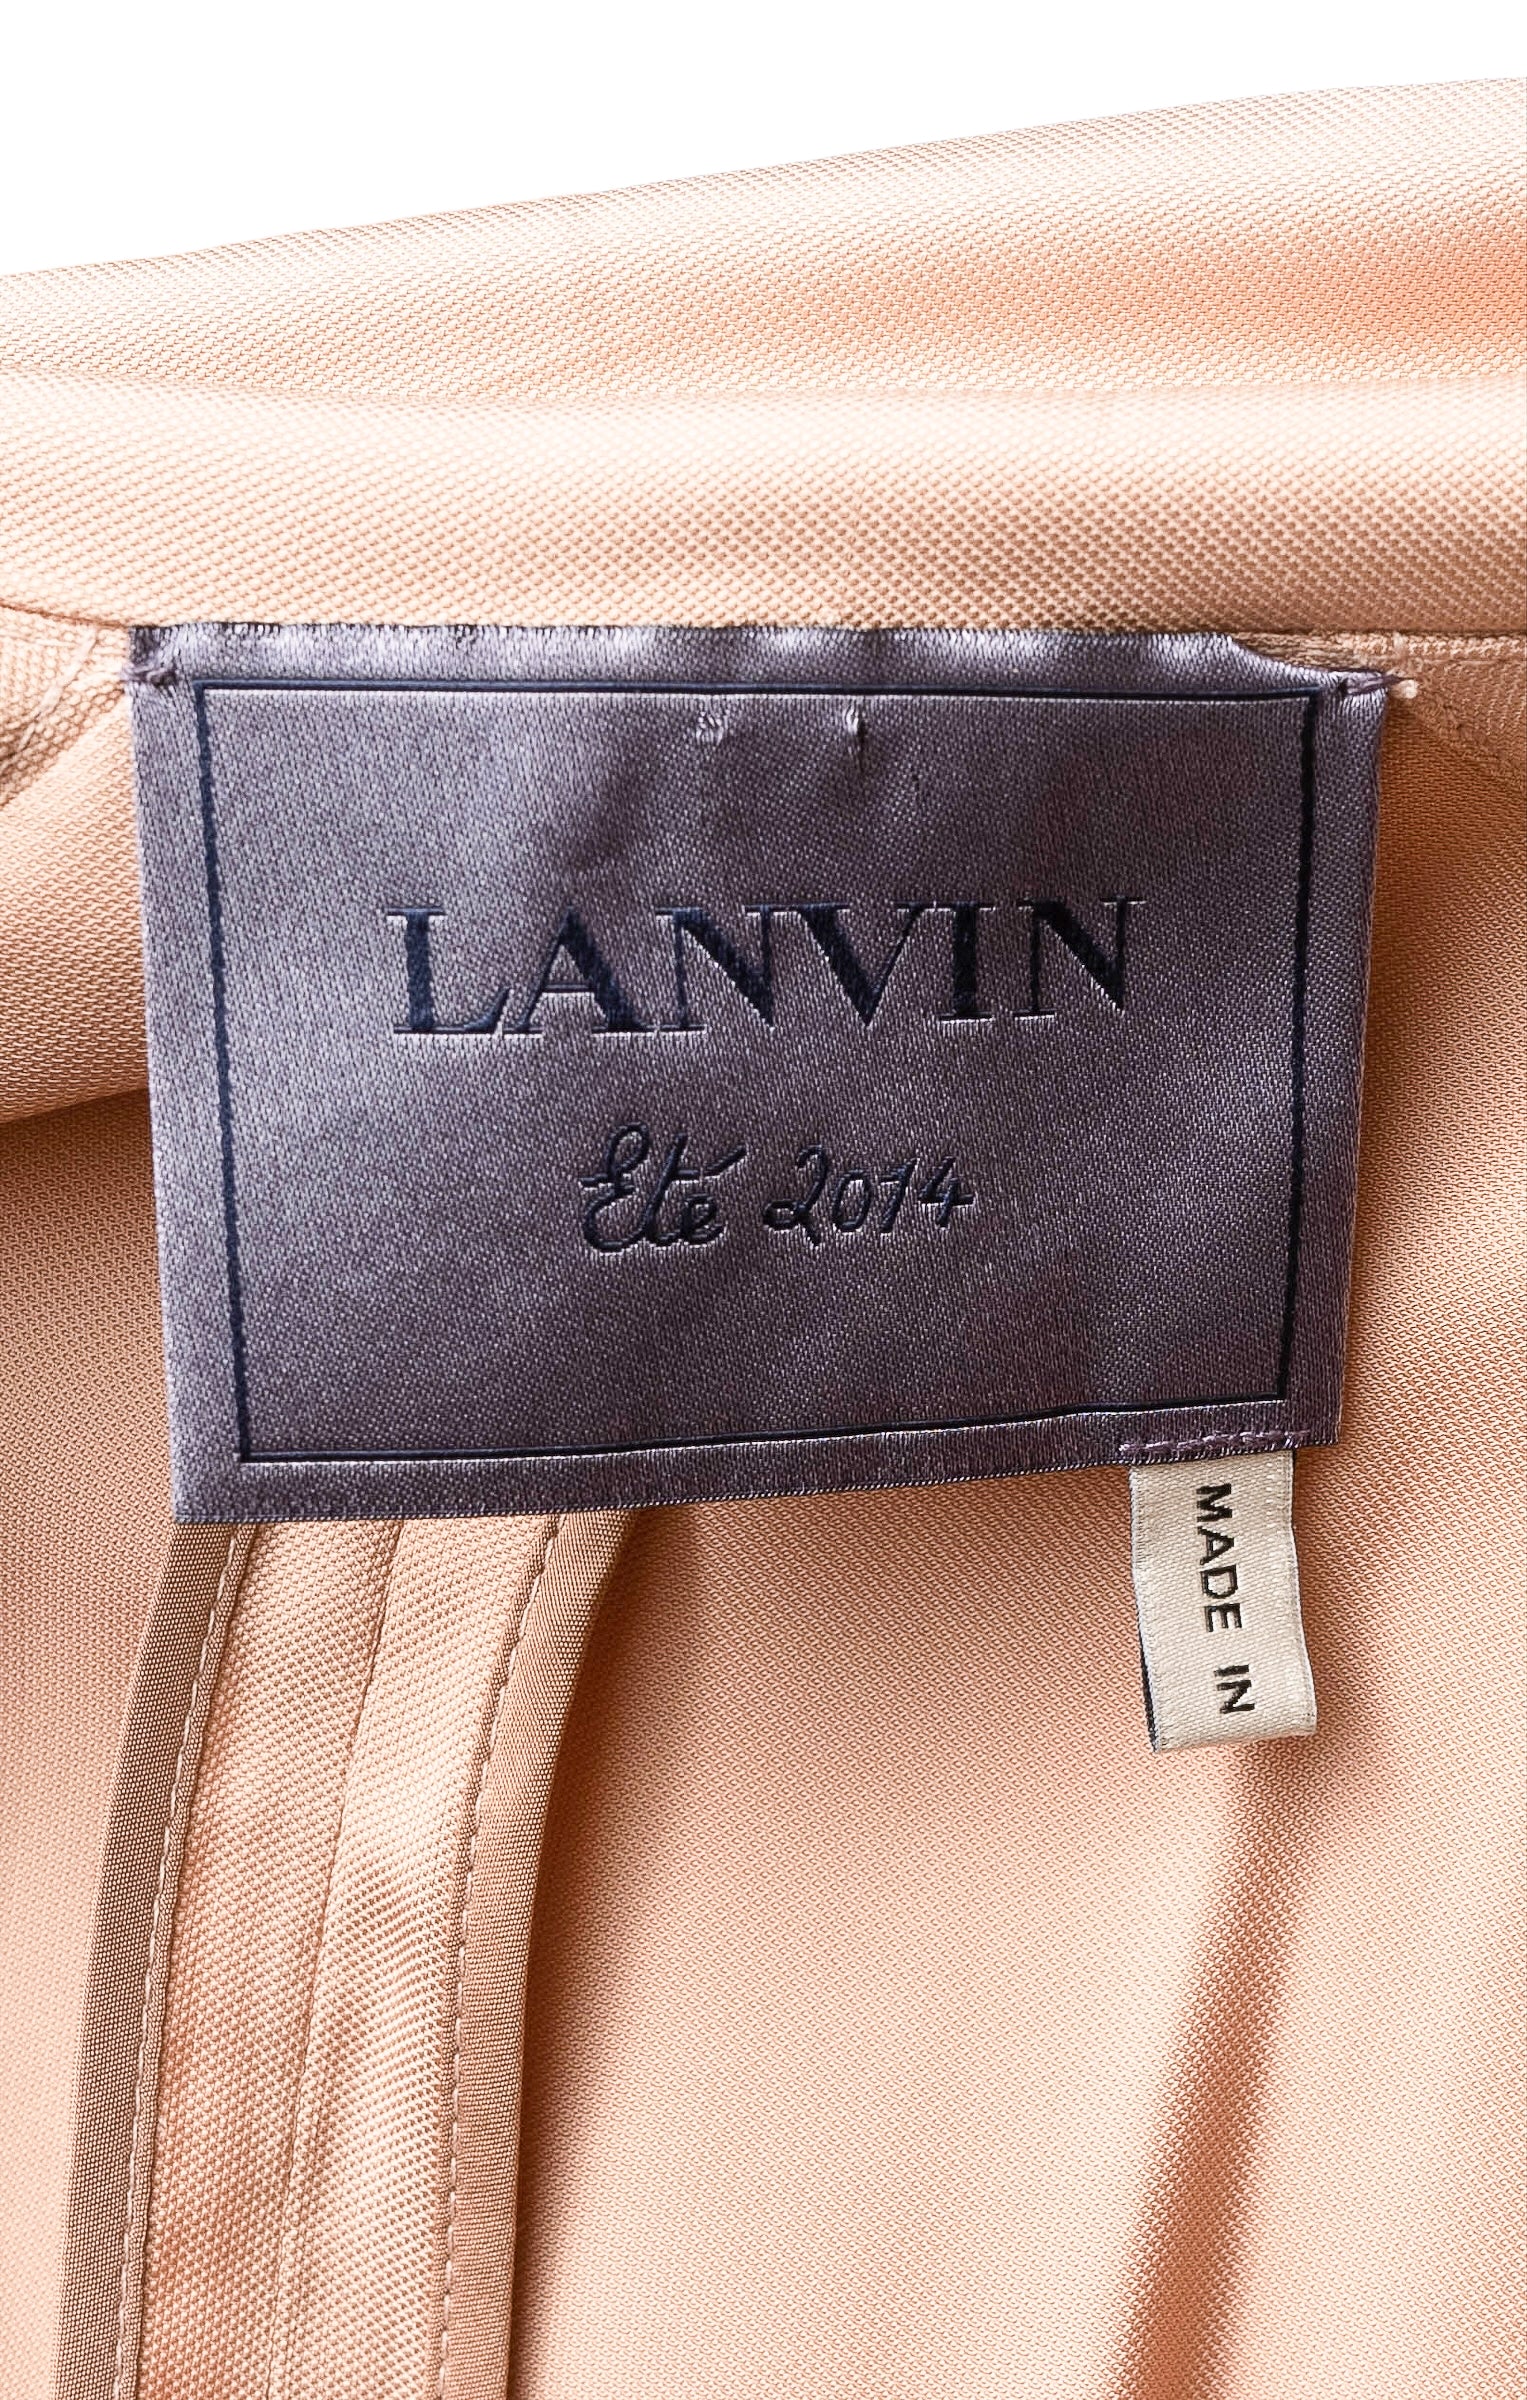 LANVIN (RARE) Coat Size: FR 38 / Comparable to US 4-6